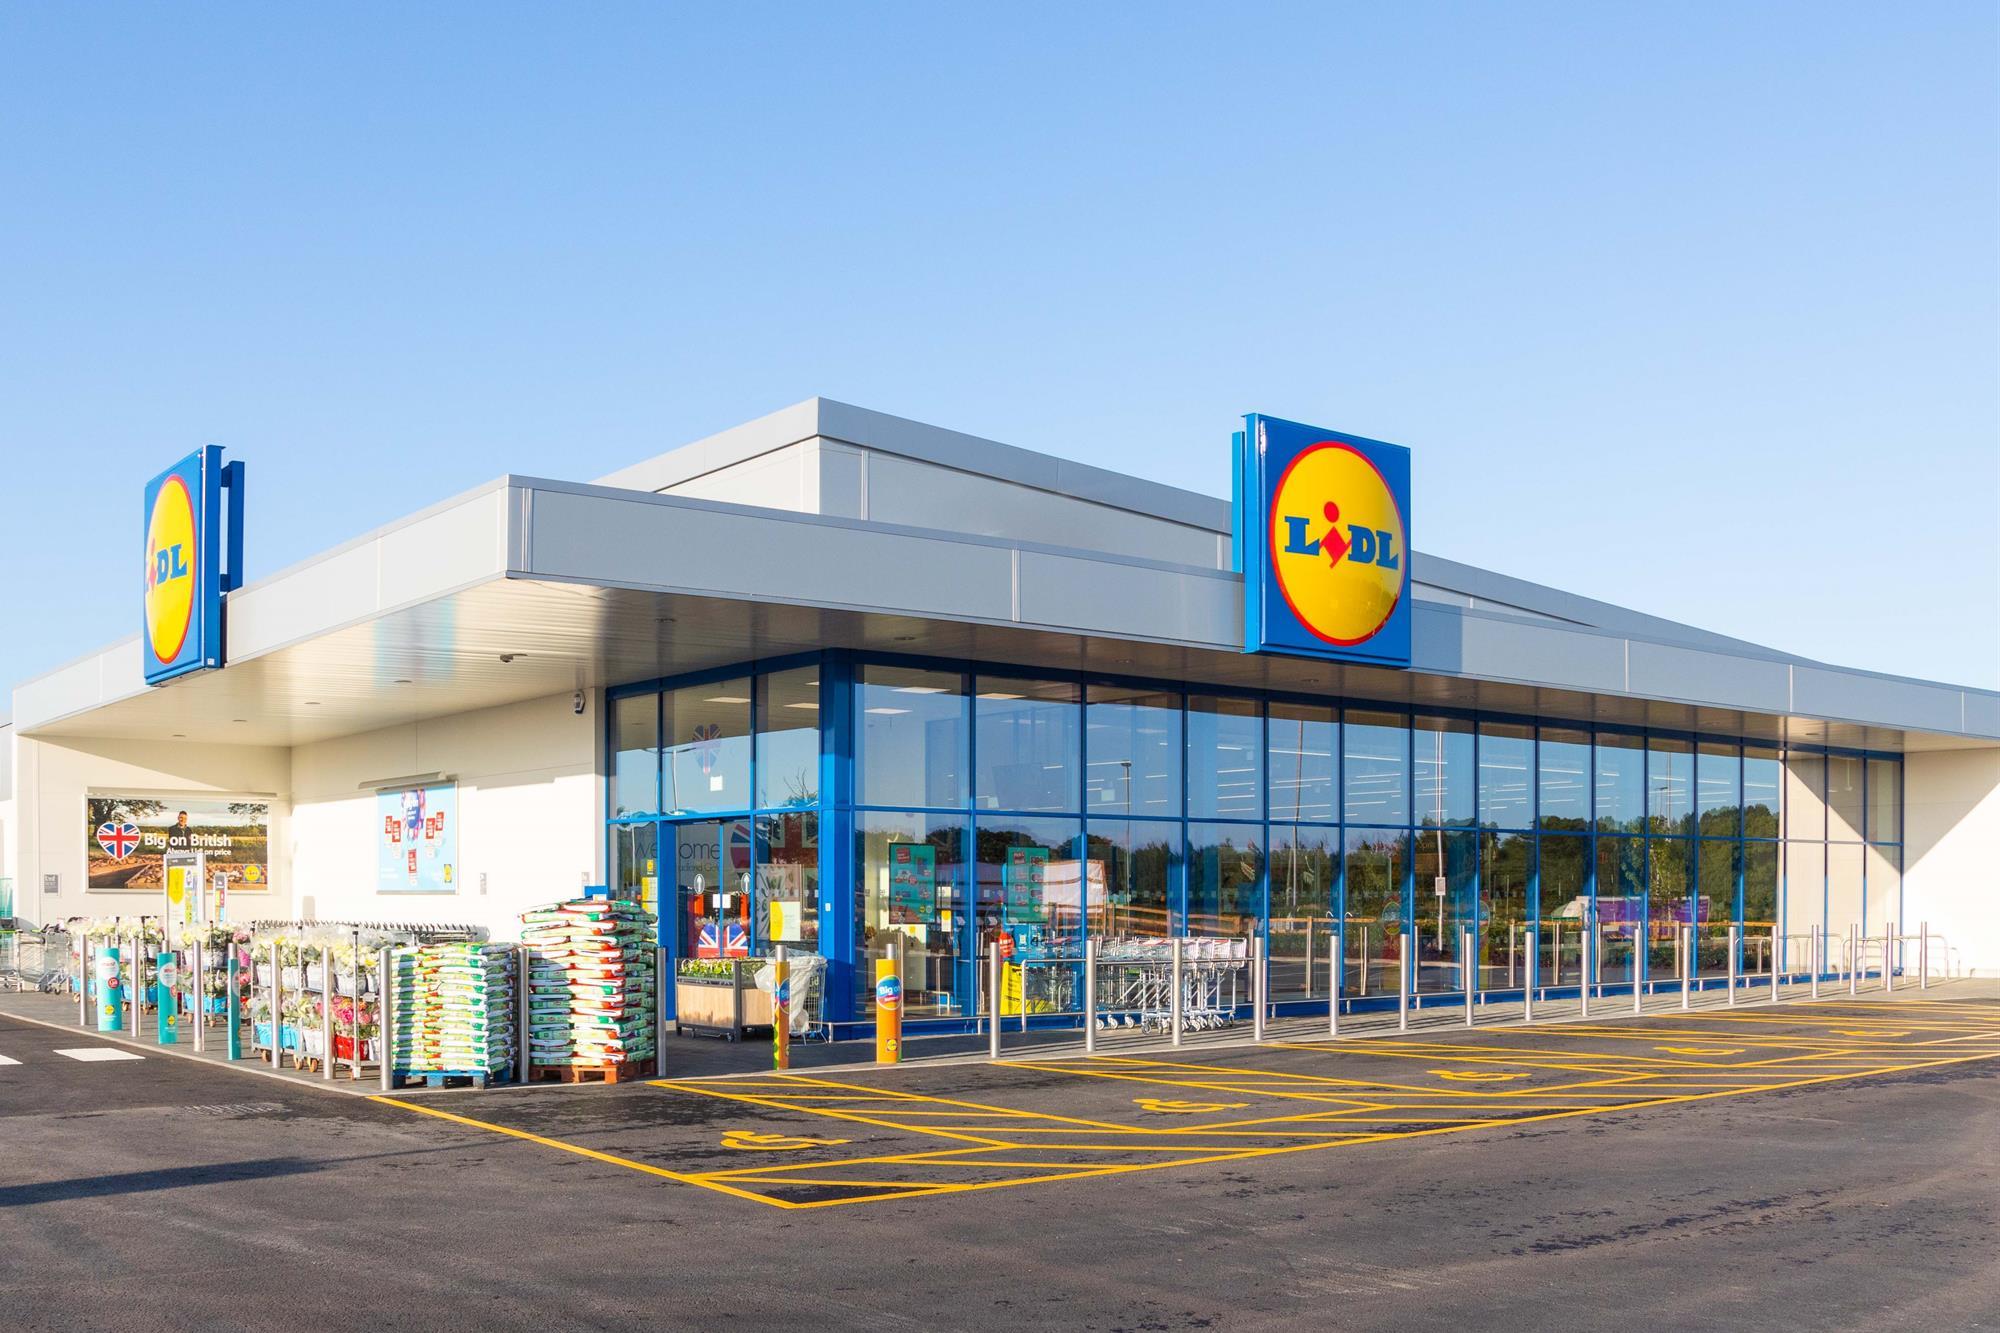 Lidl offers finder's fee to anyone who identifies a suitable site for a new store | News | The Grocer